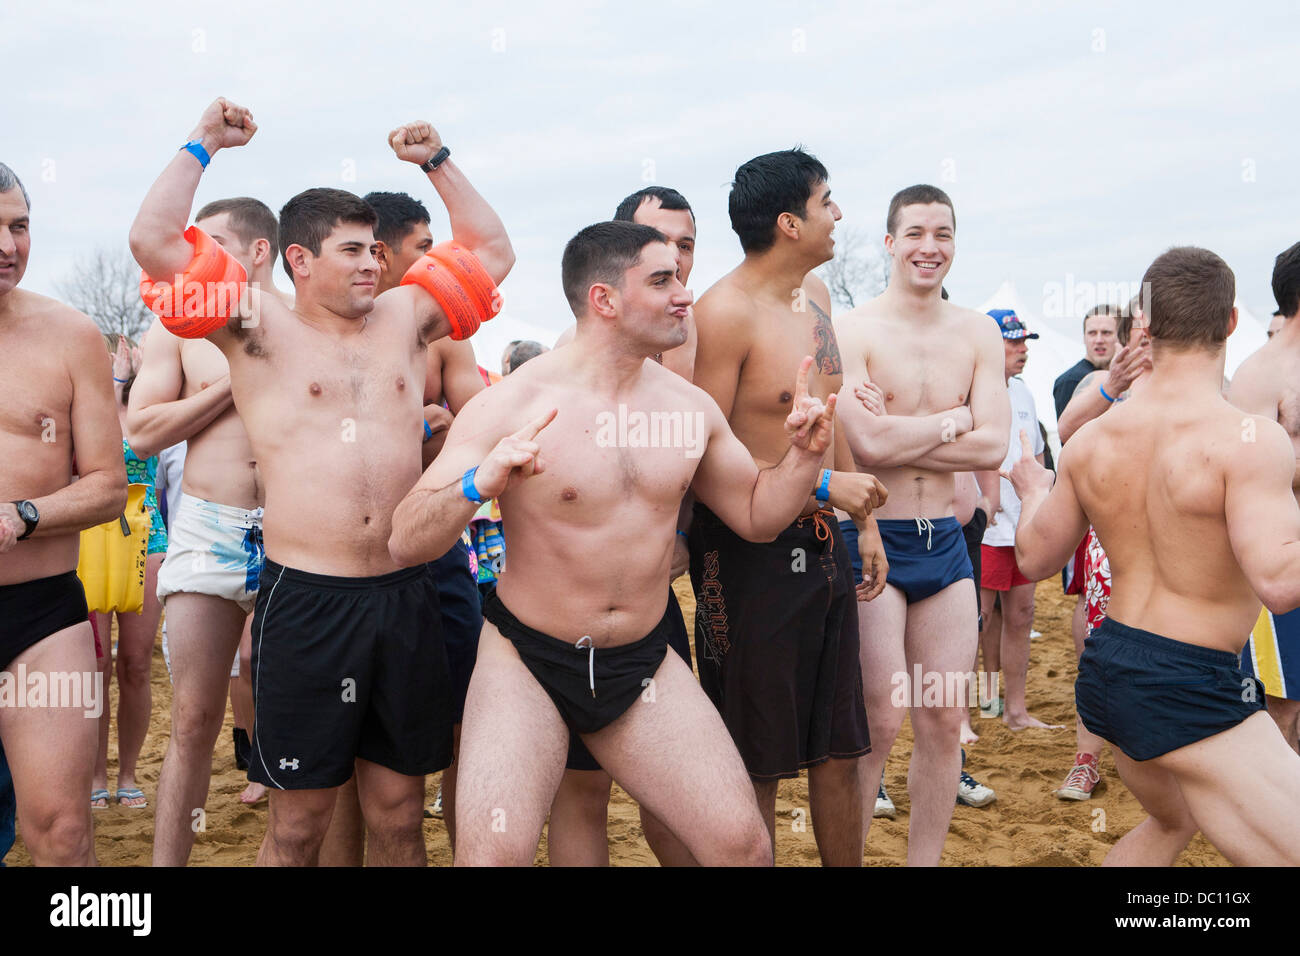 A polar bear plunge event where participants jump into ice cold water during the winter.  Stock Photo